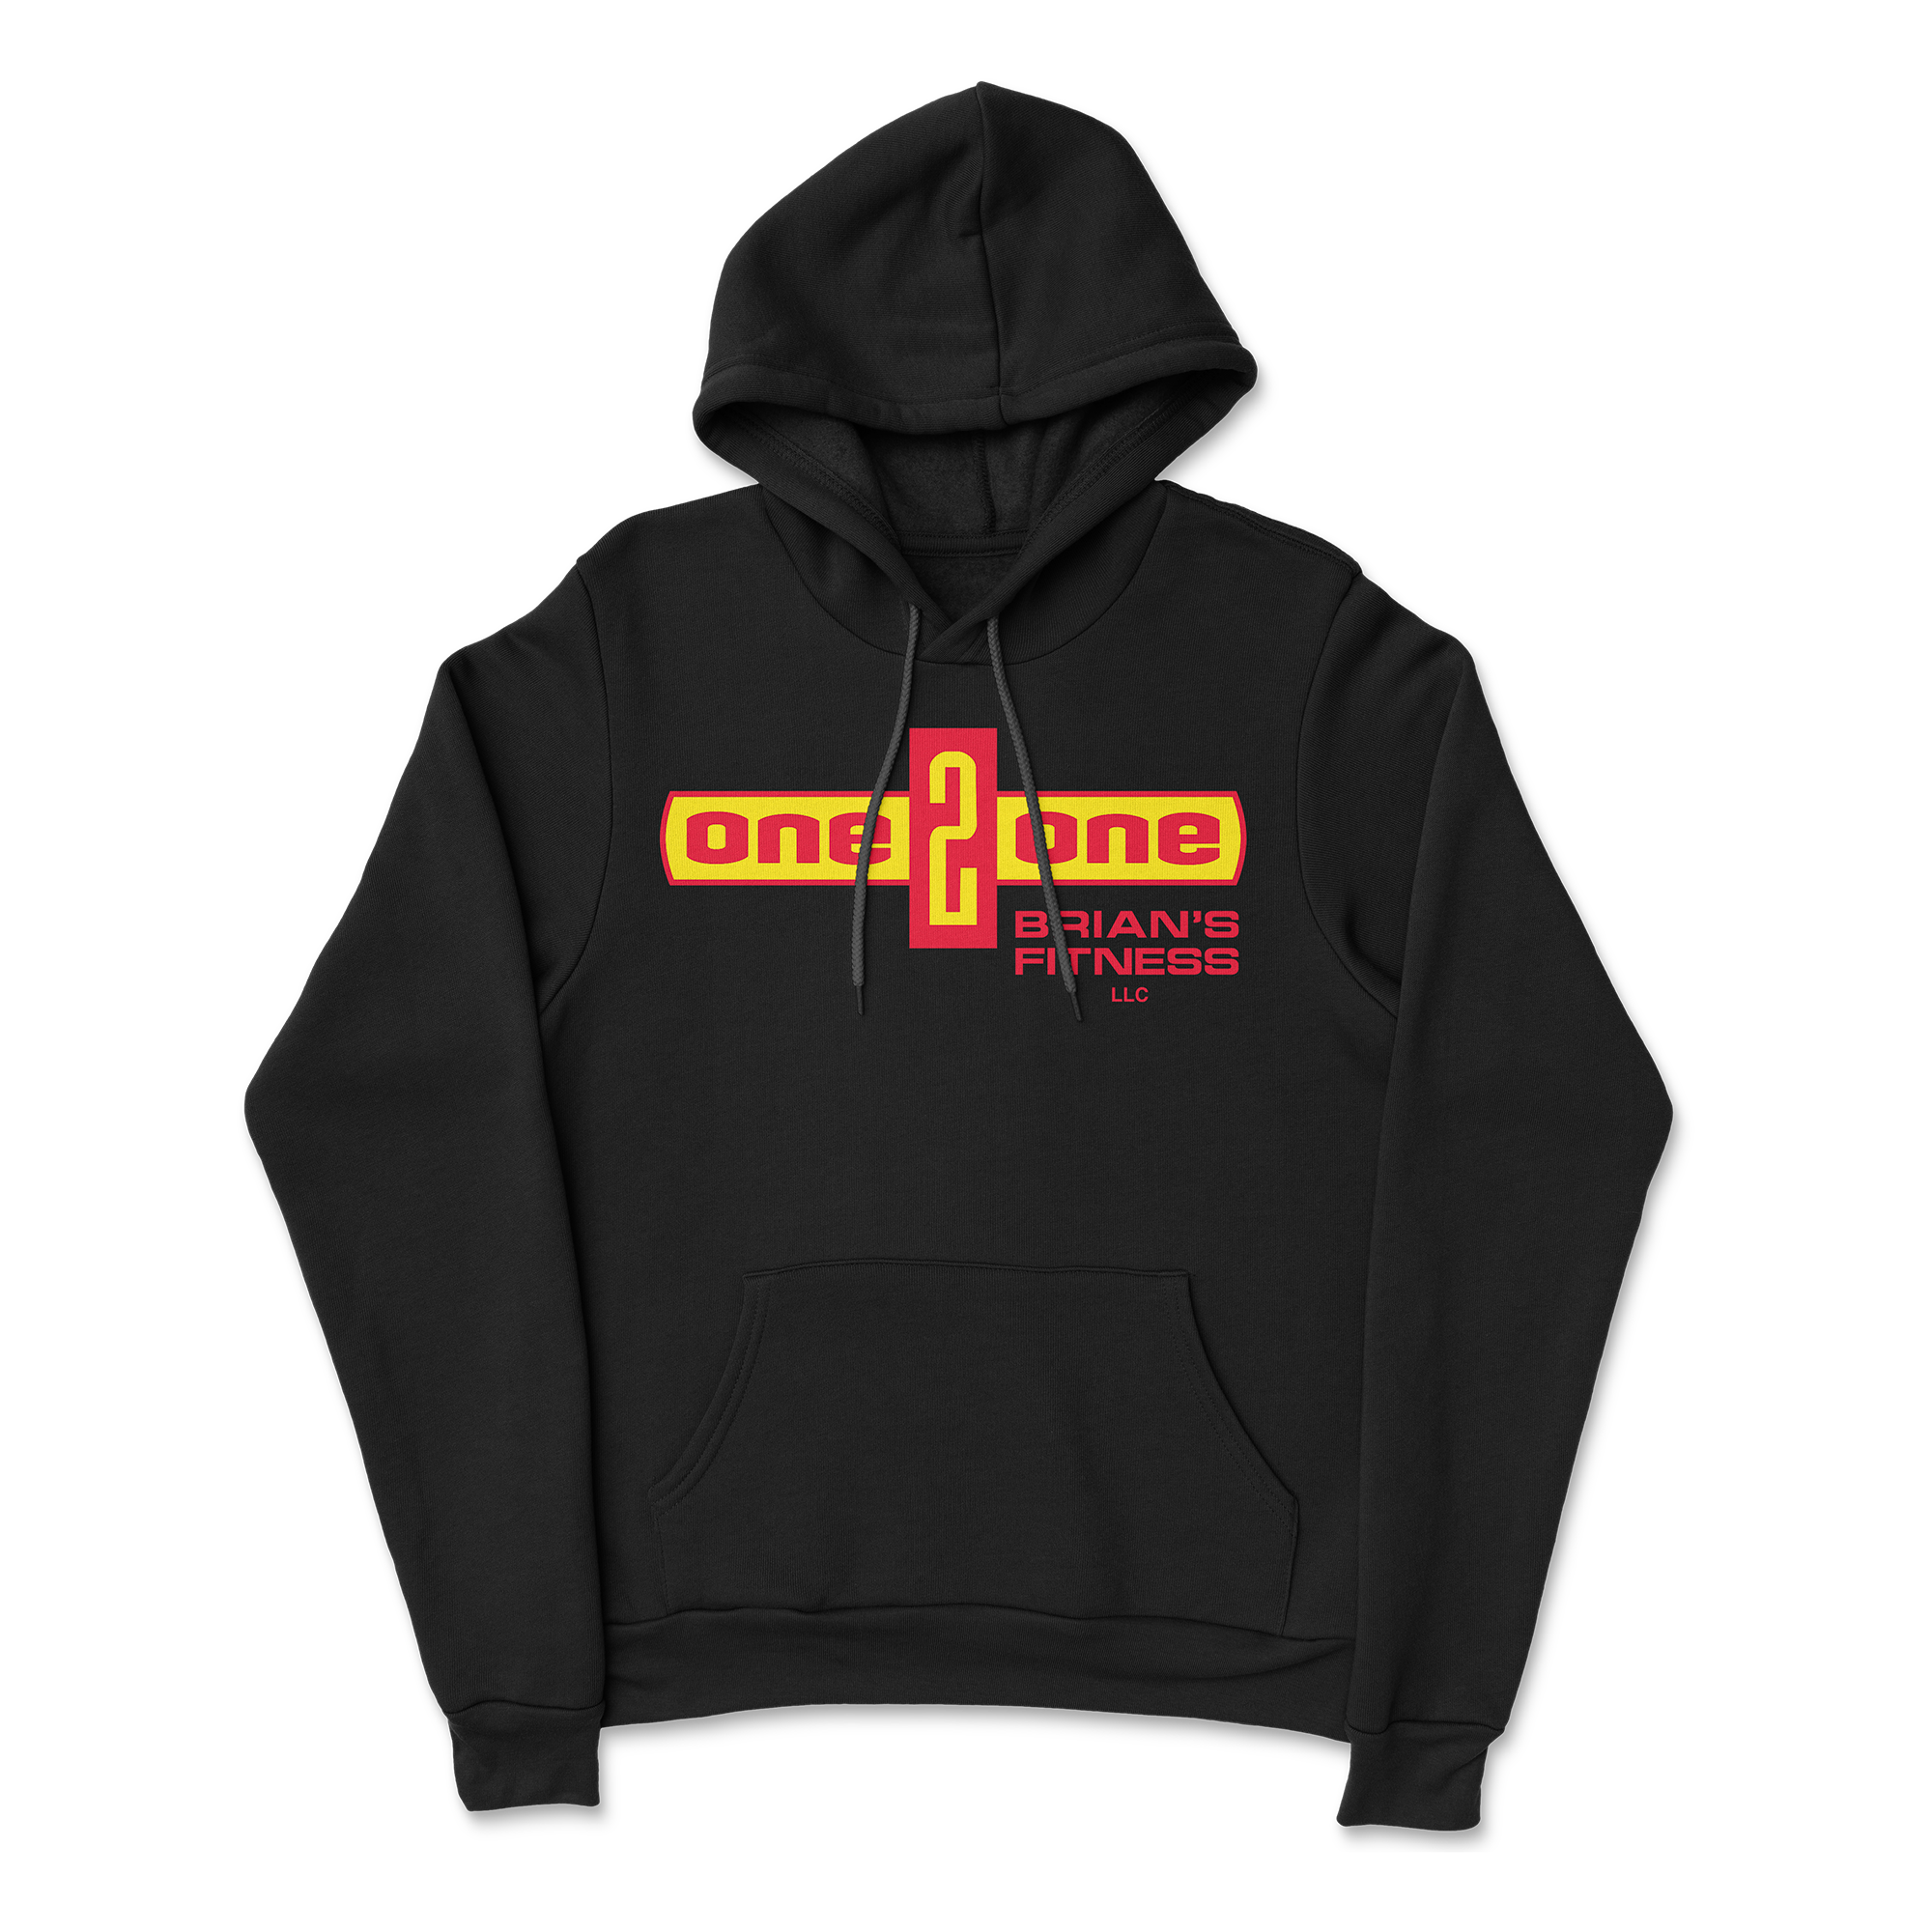 One 2 One Fitness - Uncommon Breed Unisex Hoodie